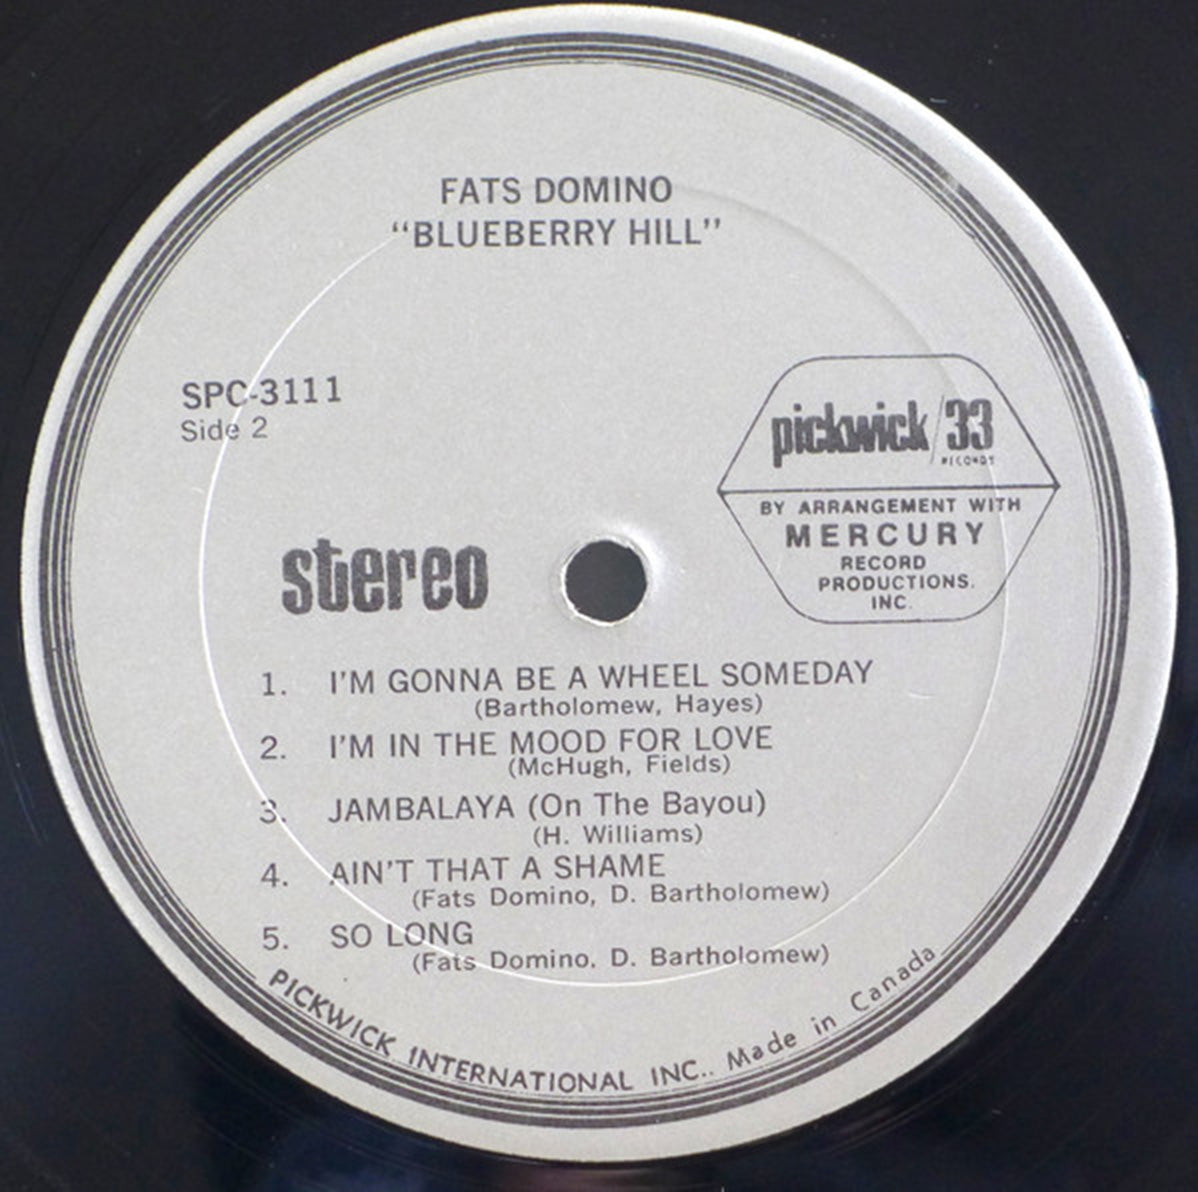 Fats Domino – Blueberry Hill!